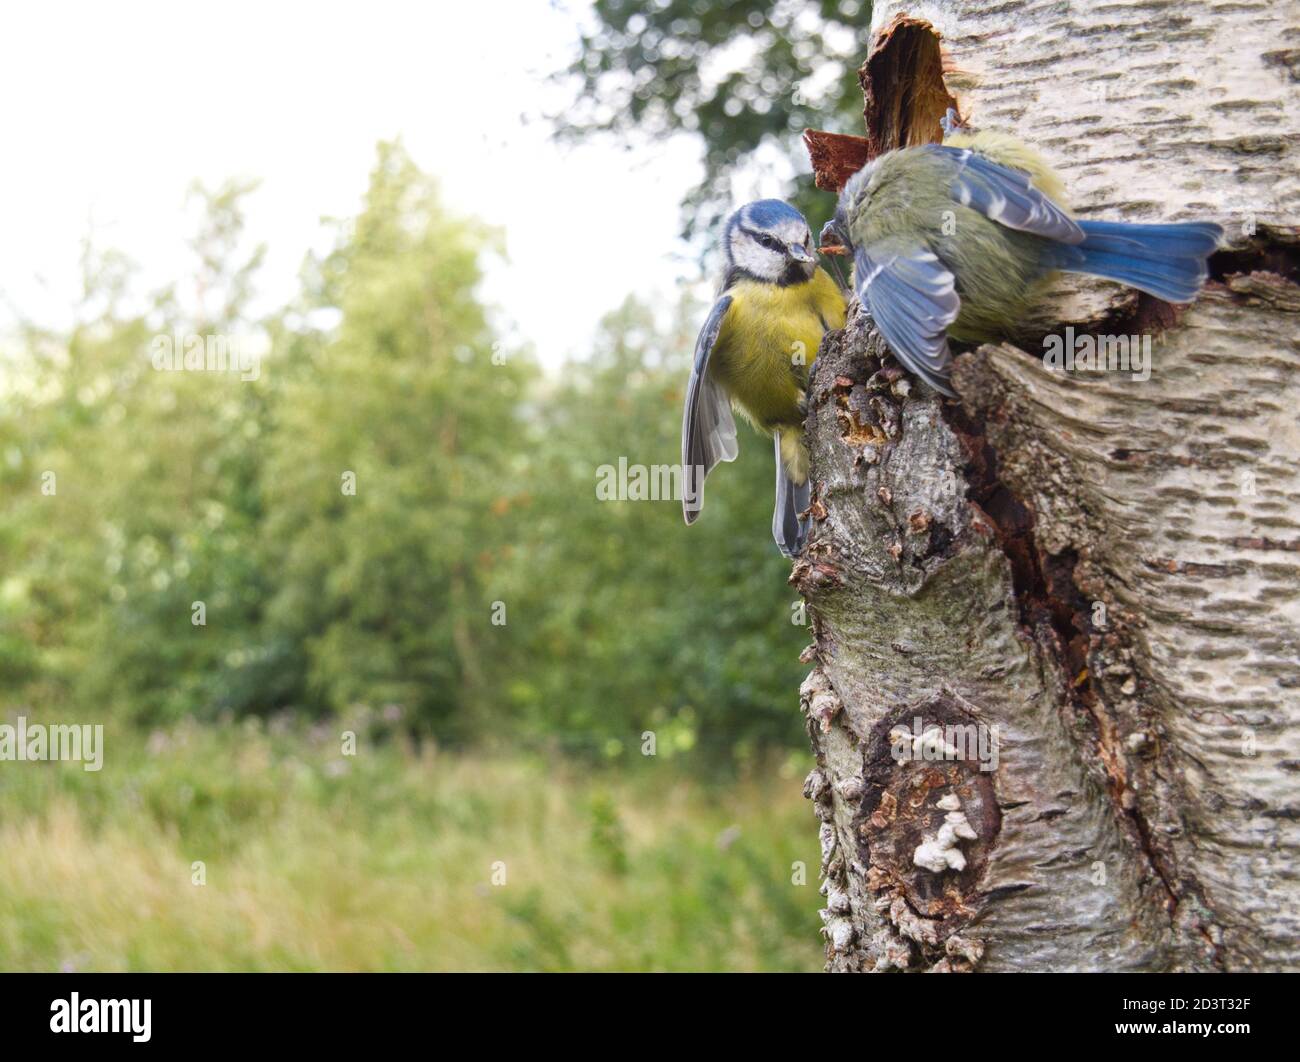 Blue Tit ( Cyanistes caeruleus ) wide angle image showing two birds fighting in environment. Taken with remote control camera trap in Wales 2020. Stock Photo